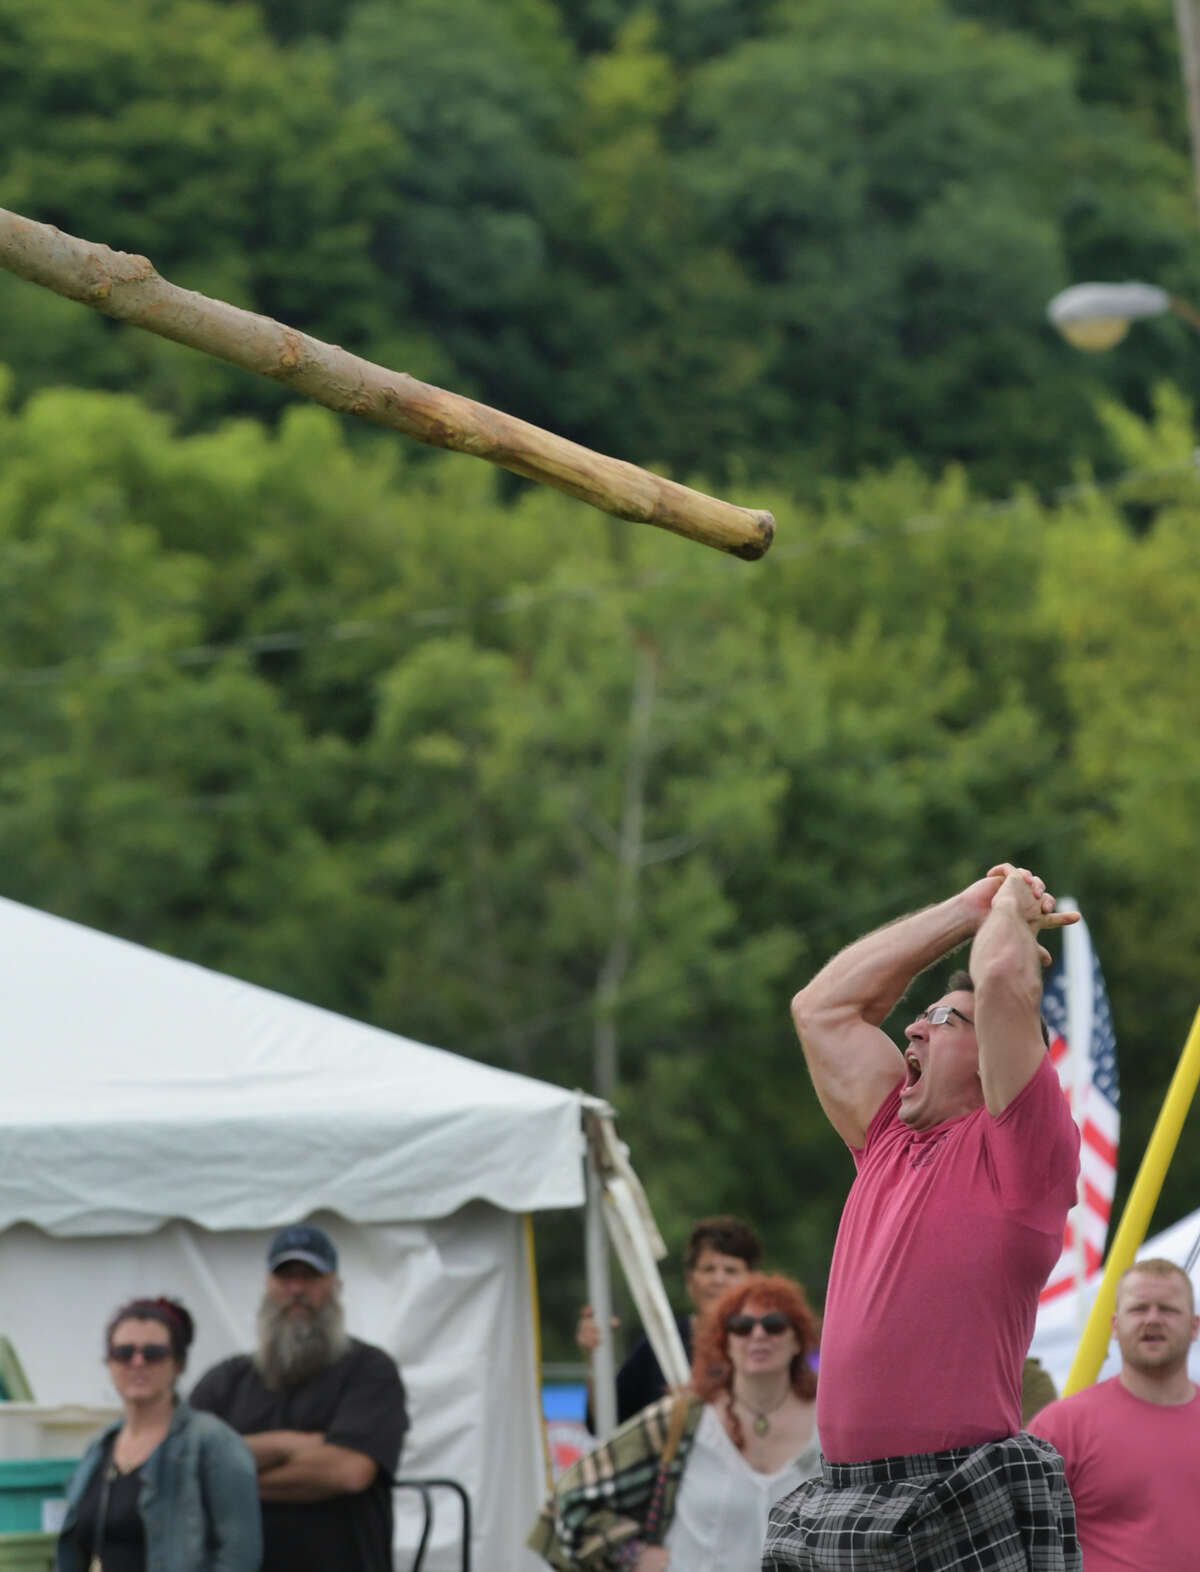 Scottish Games in Altamont Everything you need to know